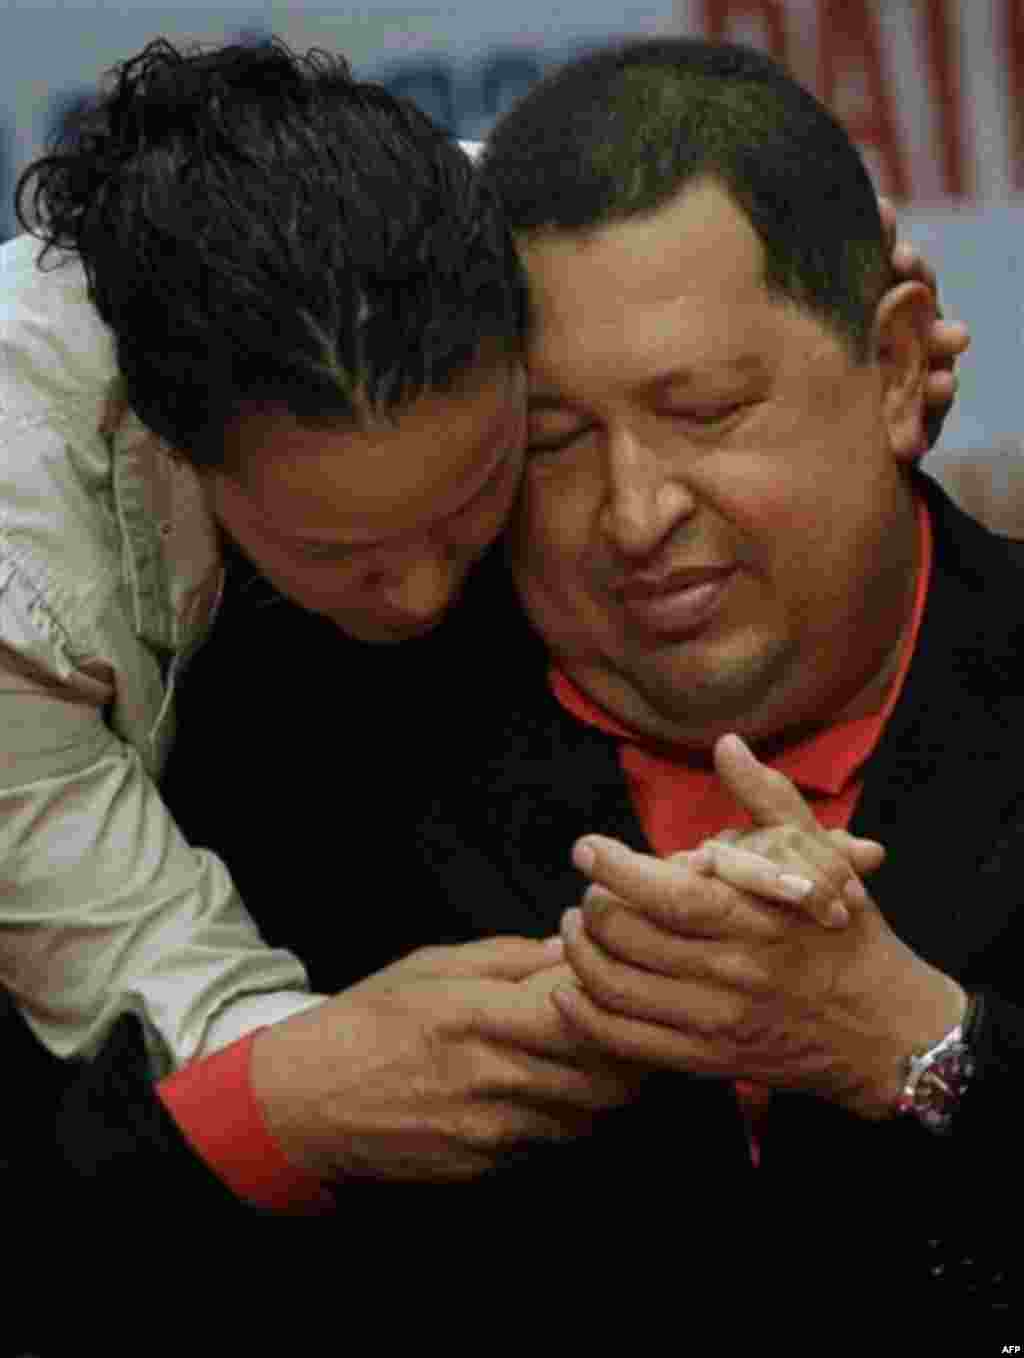 Venezuela's President Hugo Chavez, right, shares a moment with his daughter Rosa as he attends a concert in his honor at the Teresa Carreno theater in Caracas, Venezuela, Thursday, Feb. 23, 2012. Chavez is headed to Cuba for surgery Friday to remove a 